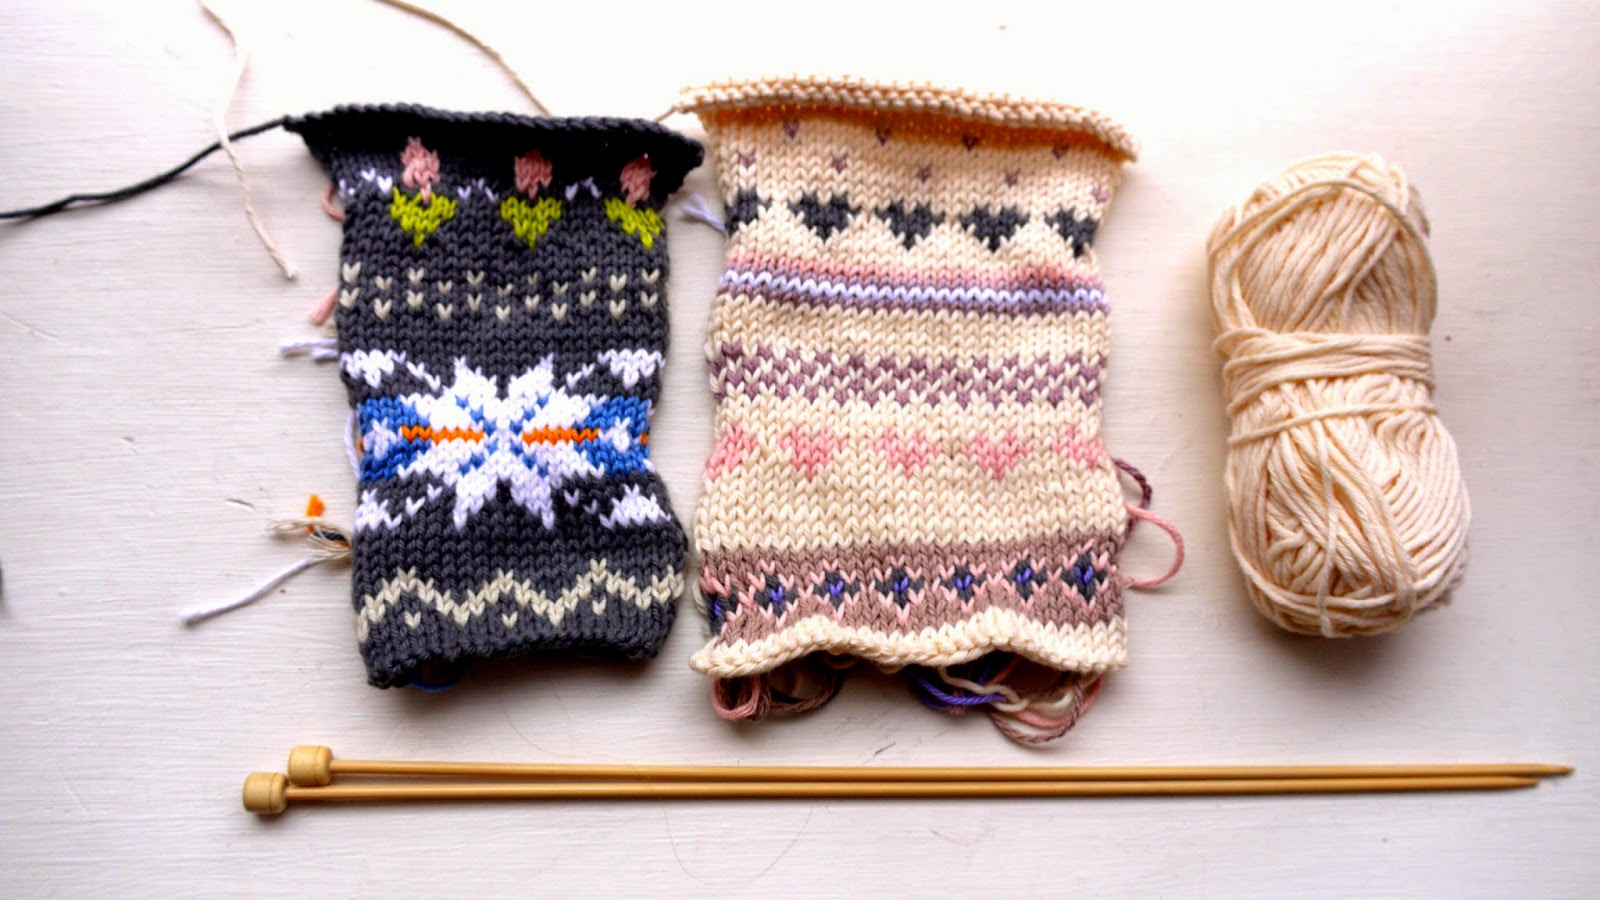 Porcupine Jane ..... : fair isle and nordic knits (by Nikki Trench)